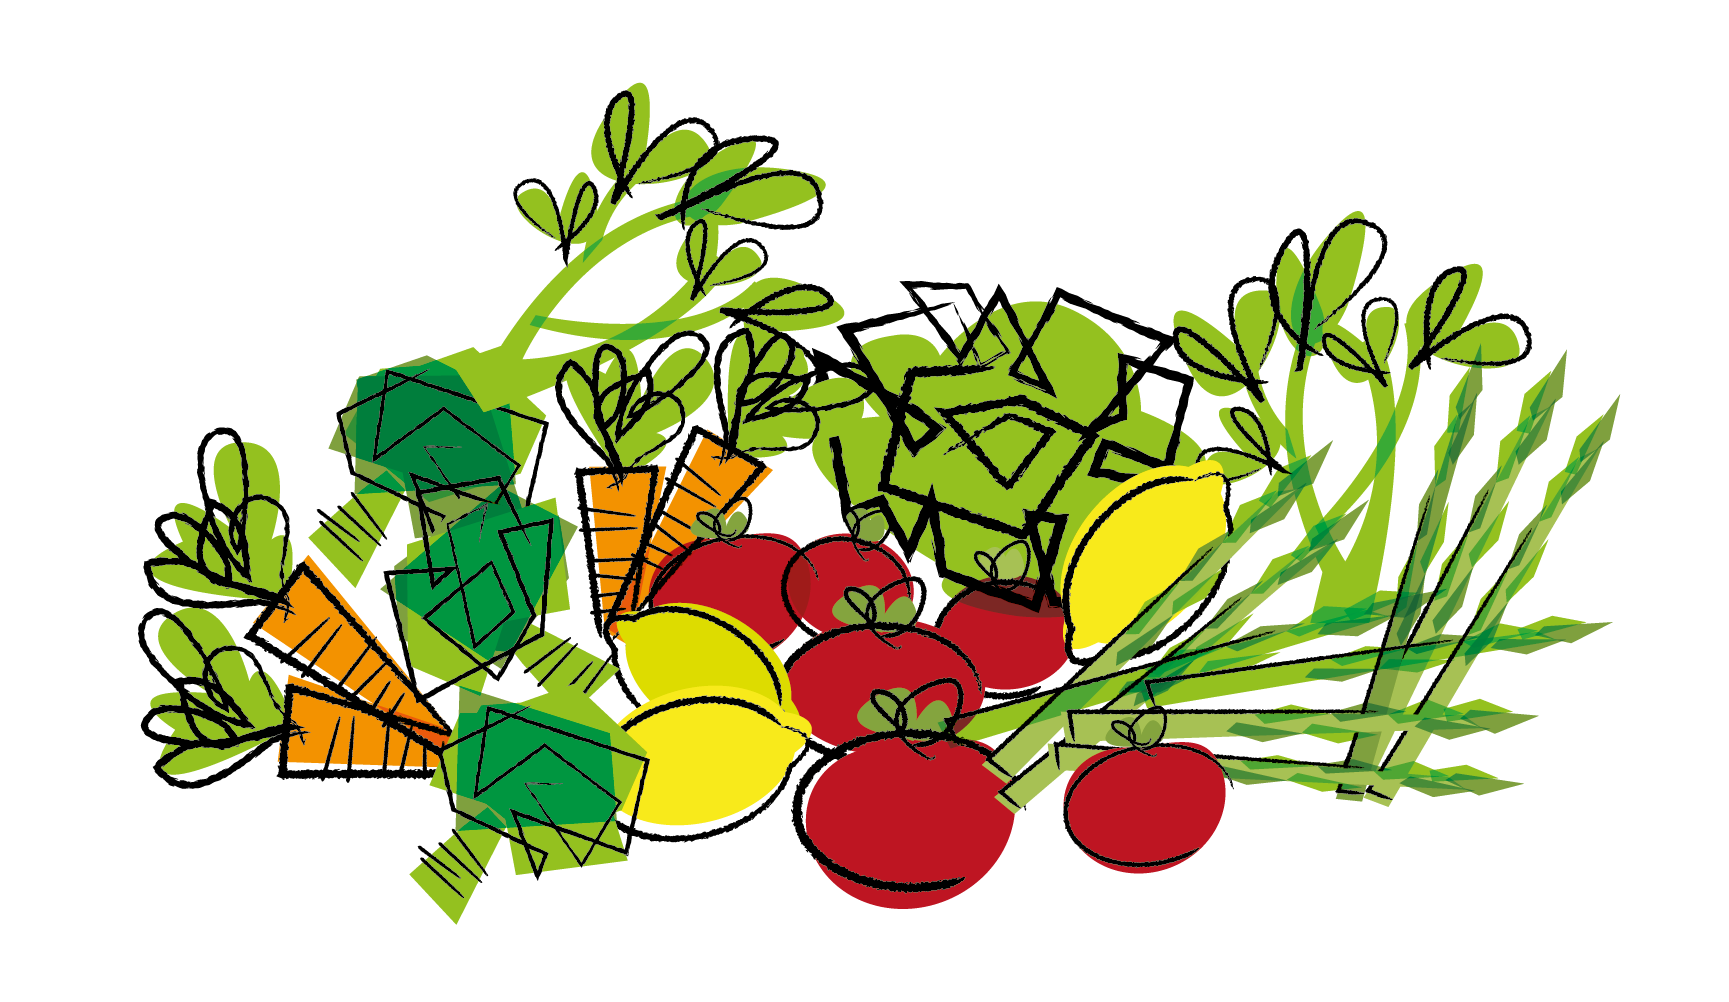 Tasty locally sourced and. Farm clipart simple